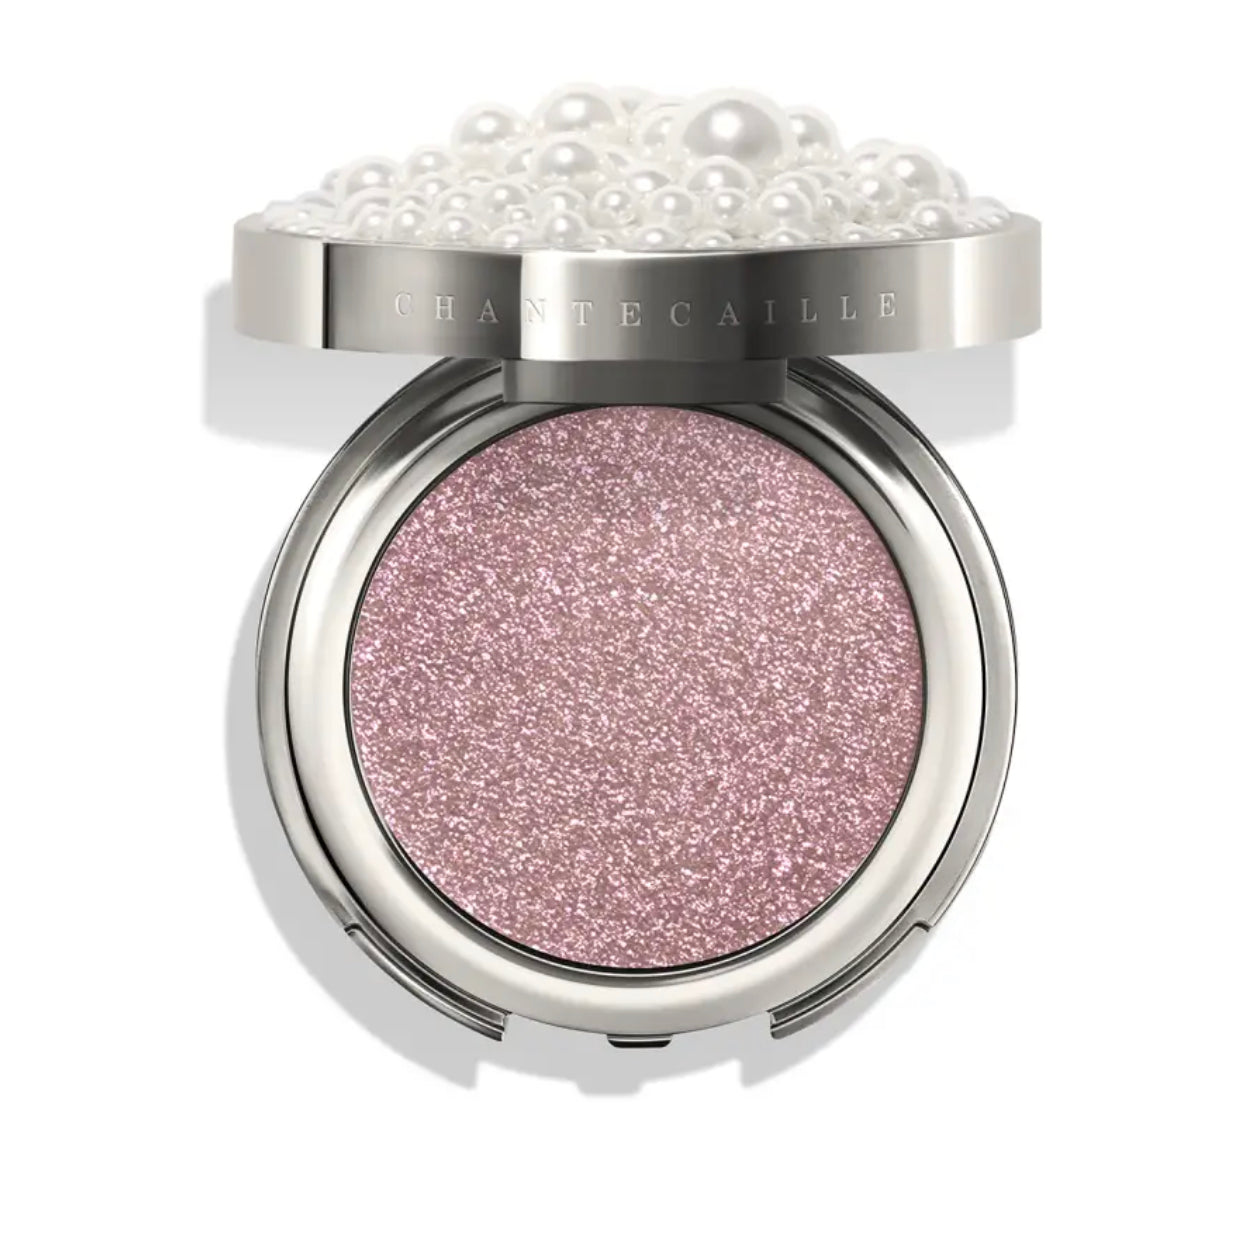 CHANTECAILLE, LUMIERE EYE SHEEN LIMITED EDITION EYESHADOW